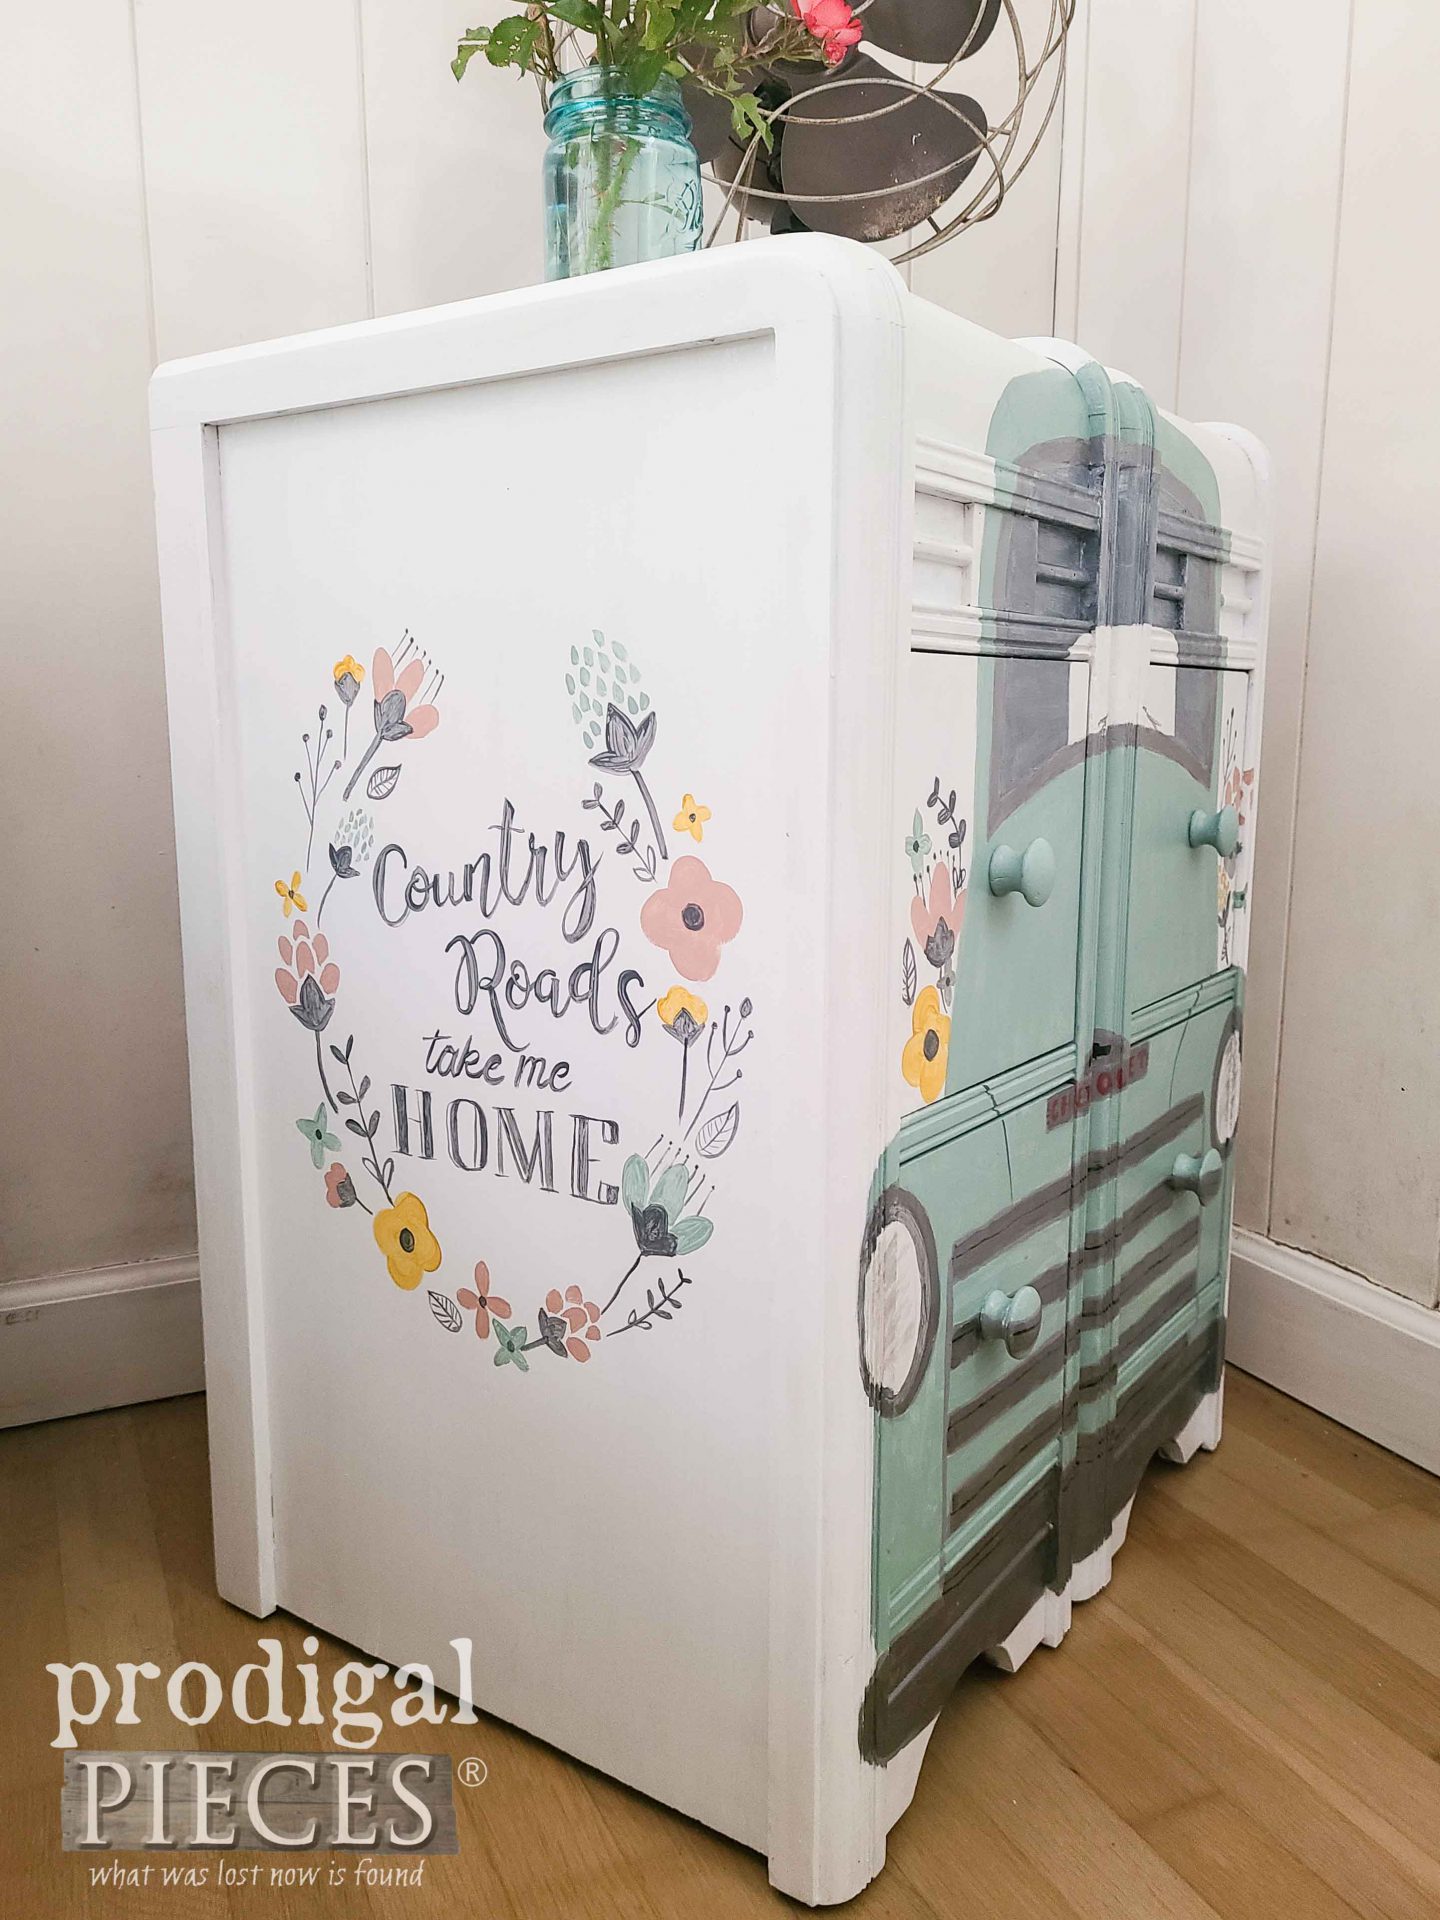 Whimsical Hand-Painted art on Repurposed Dressing Table Chest of Drawers by Larissa of Prodigal Pieces | prodigalpieces.com #prodigalpieces #art #diy #furniture #repurposed